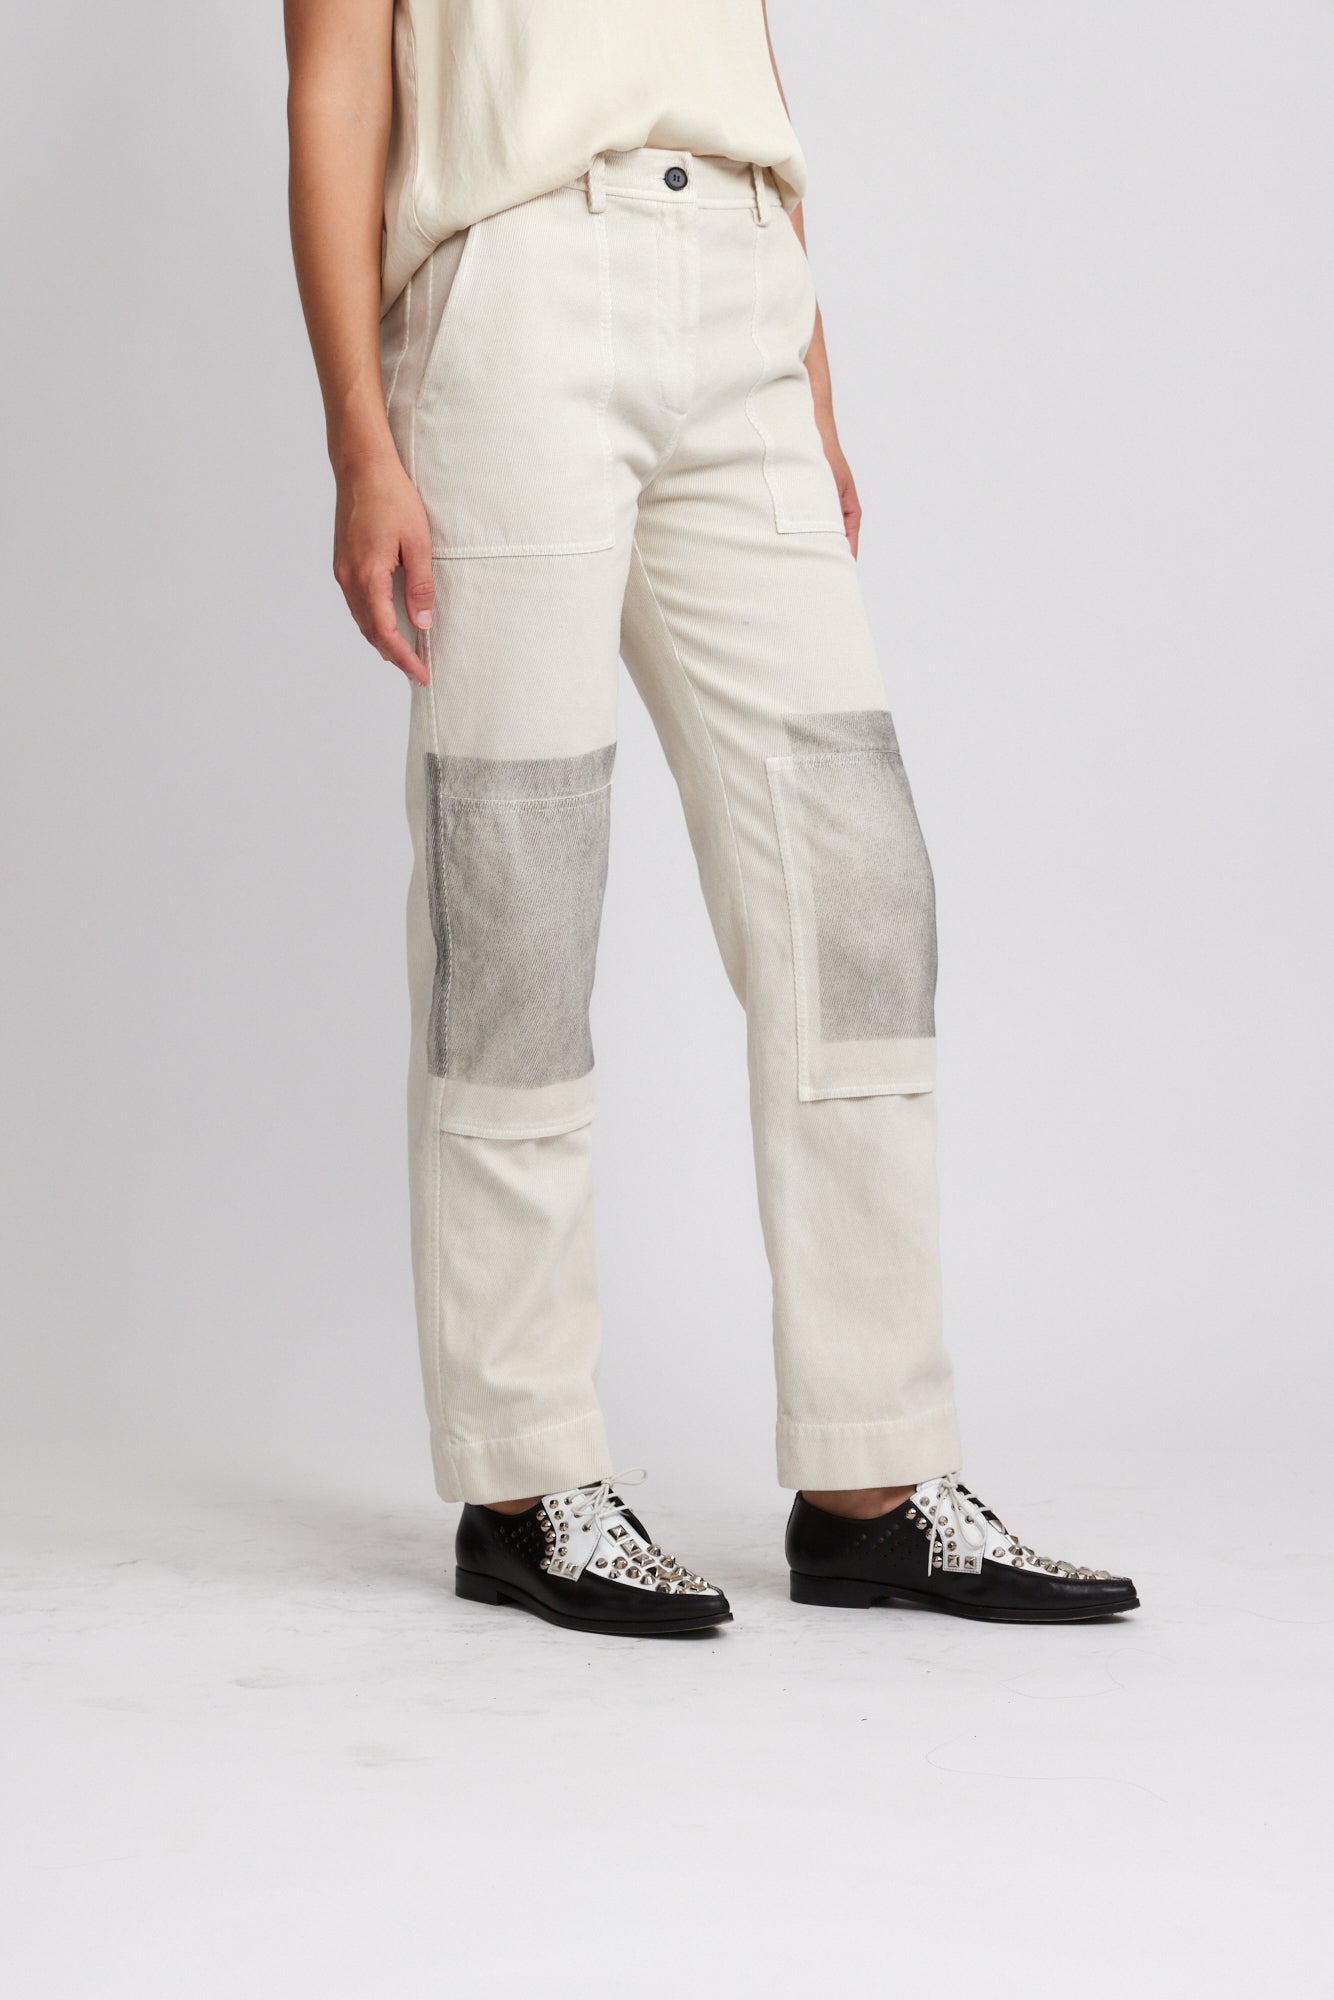 Ivory Black Paint Faille Work Pant Side Close-Up View